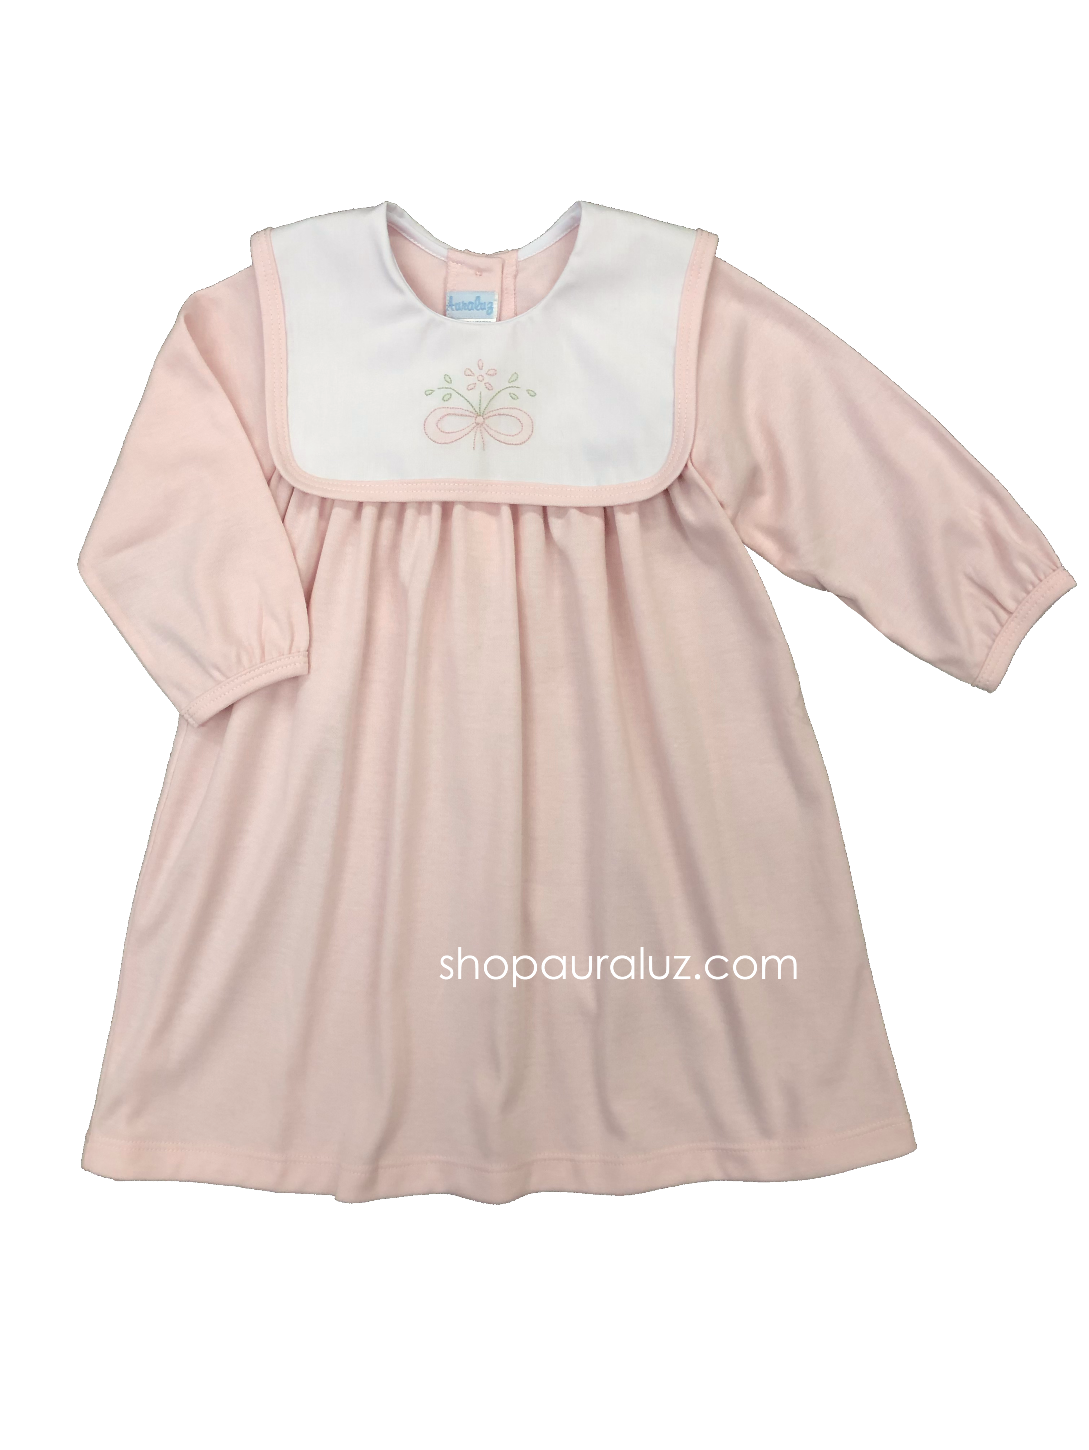 Auraluz Knit Dress...Pink with white square collar and embroidered bow